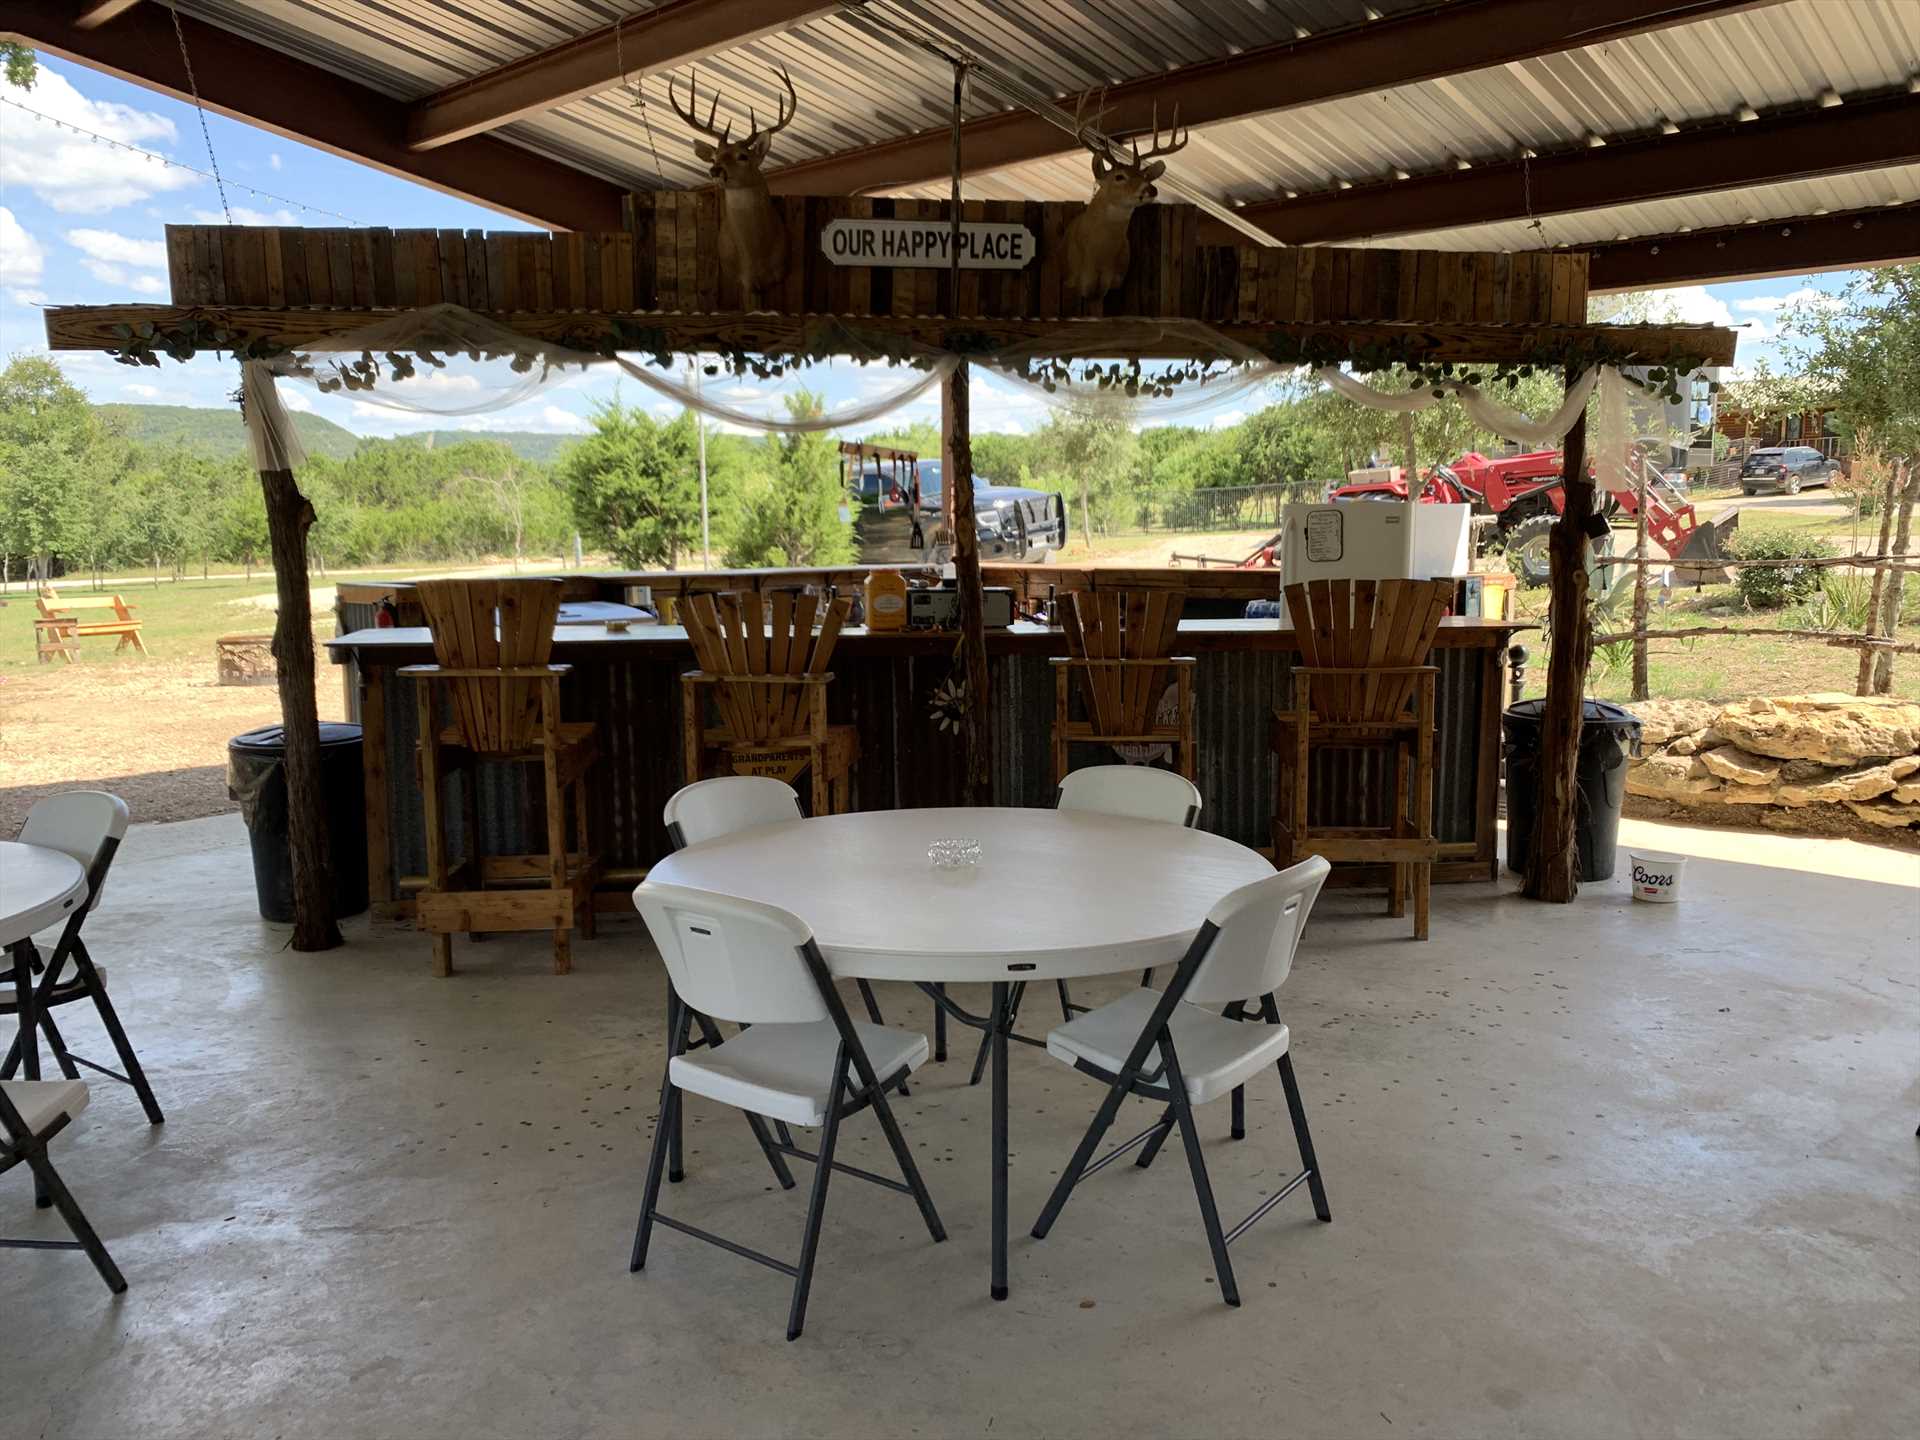                                                 Forge new friendships in the pavilion, a shared space at Al's Hideaway where fellow travelers can meet.